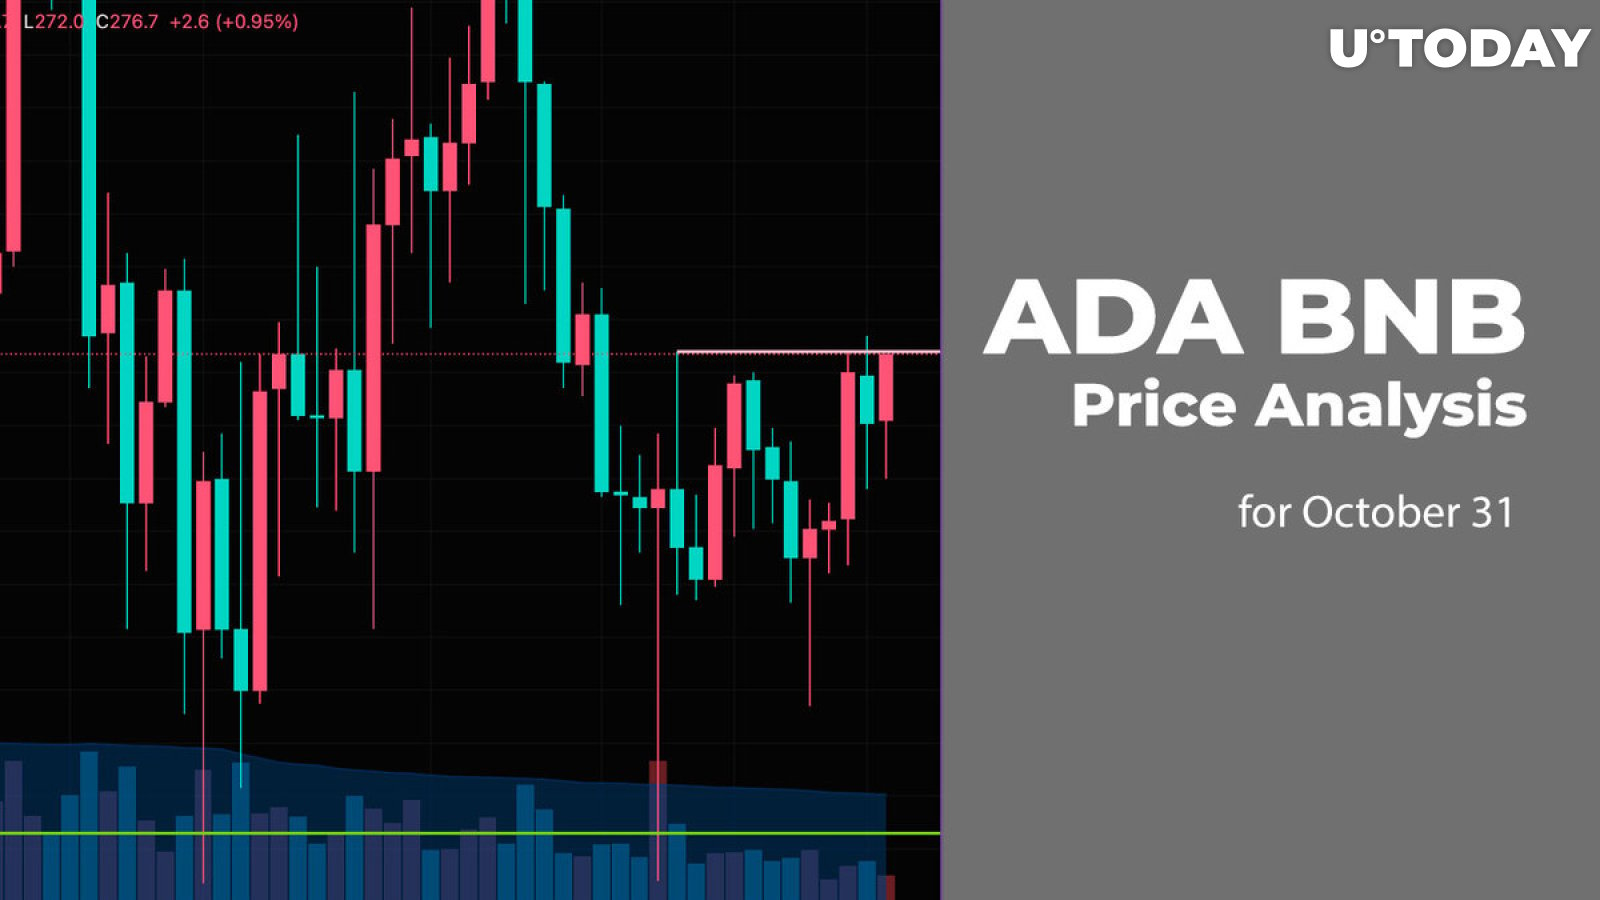 ADA and BNB Price Analysis for October 31